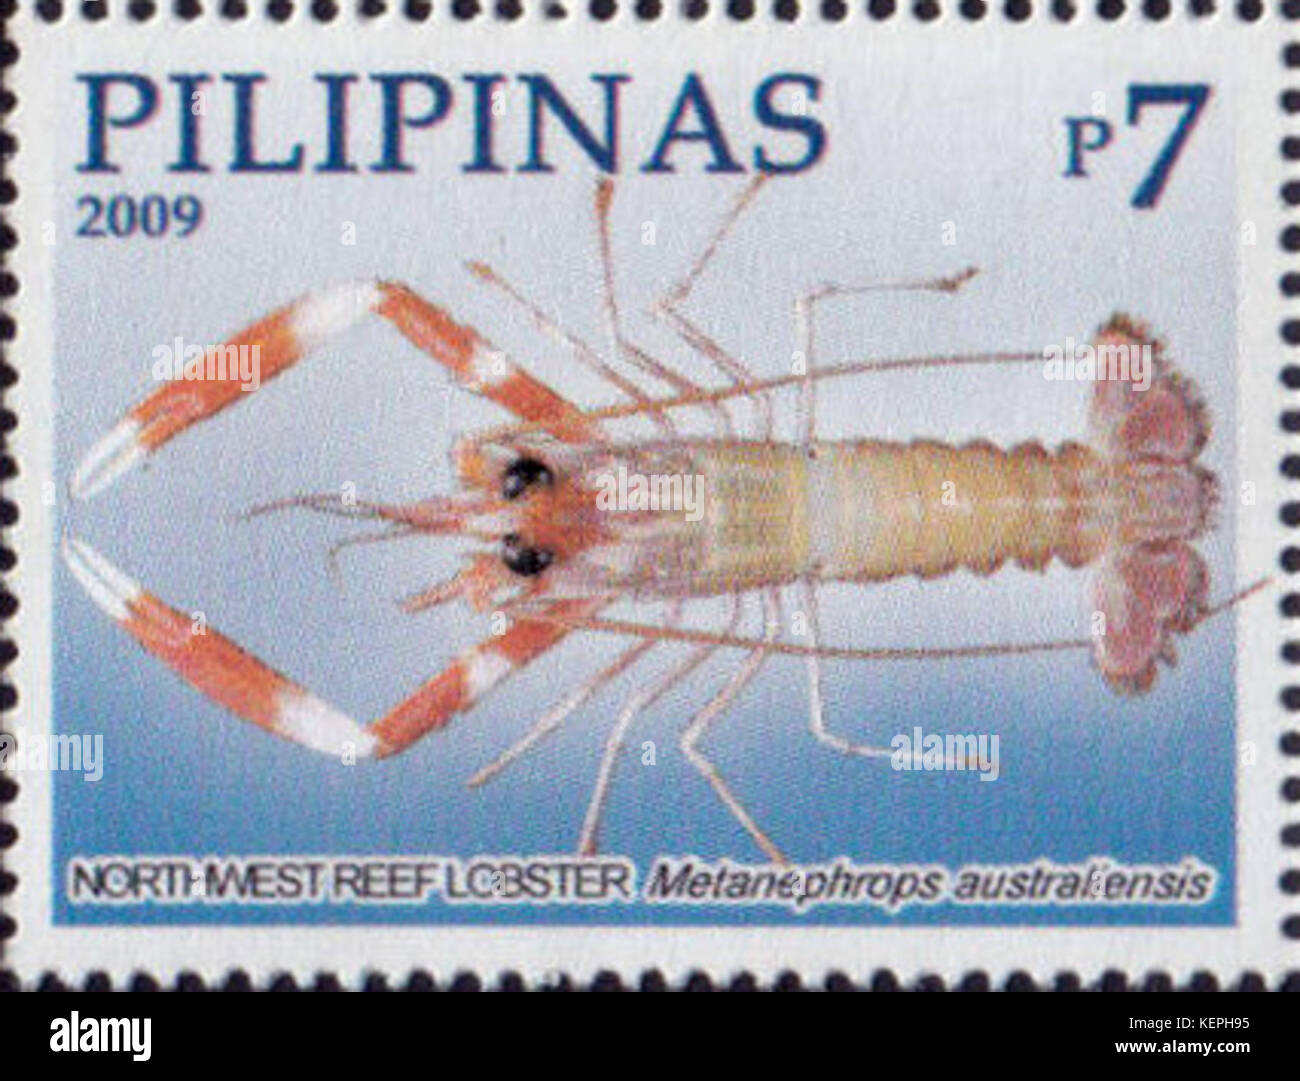 Metanephrops australiensis 2009 stamp of the Philippines Stock Photo